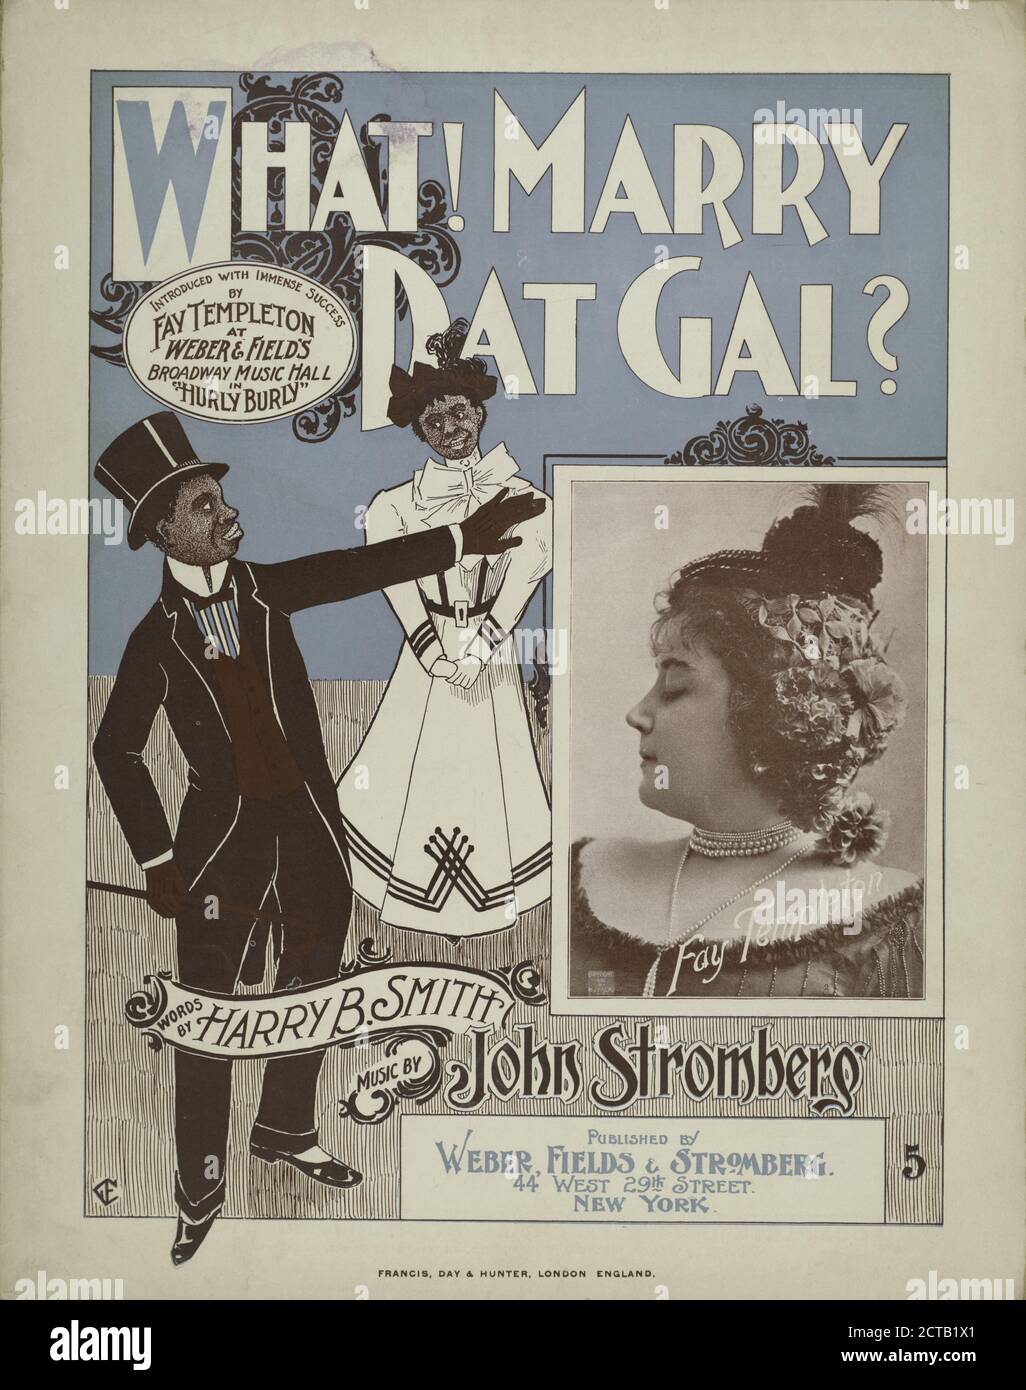 Was! Marry dat gal?, Notated music, scores, 1899 - 1899, Stromberg, John (1853-1902), Smith, Harry Bache (1860-1936 Stockfoto